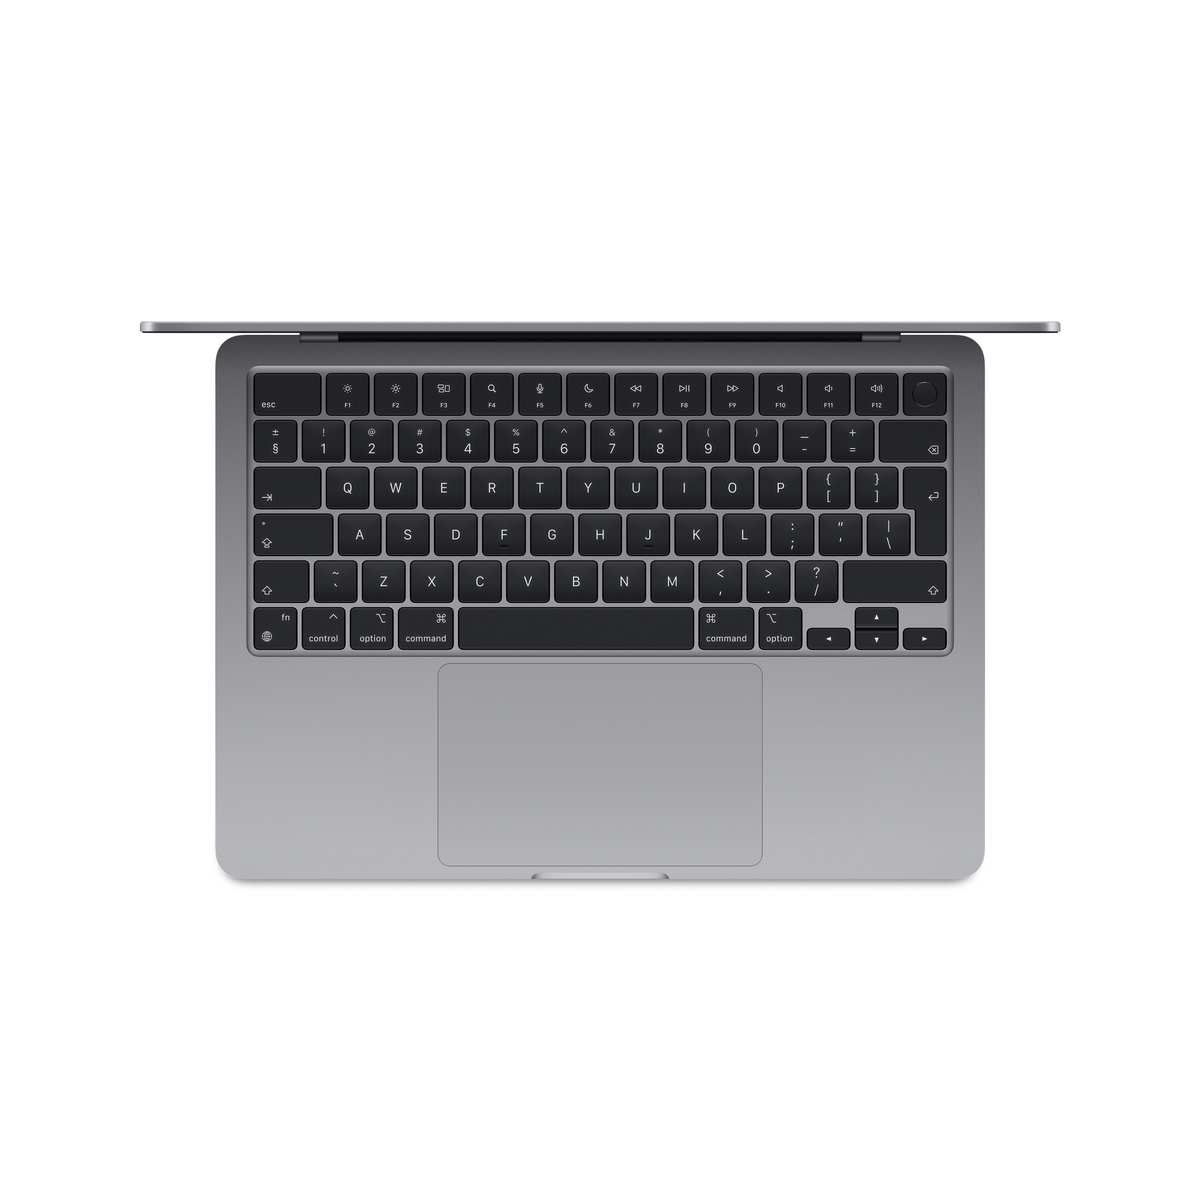 Apple MacBook Air, 13 inches, 8 GB RAM, 512 GB SSD, Apple M3 chip with 8-core CPU and 10-core GPU, macOS, English, Space Grey